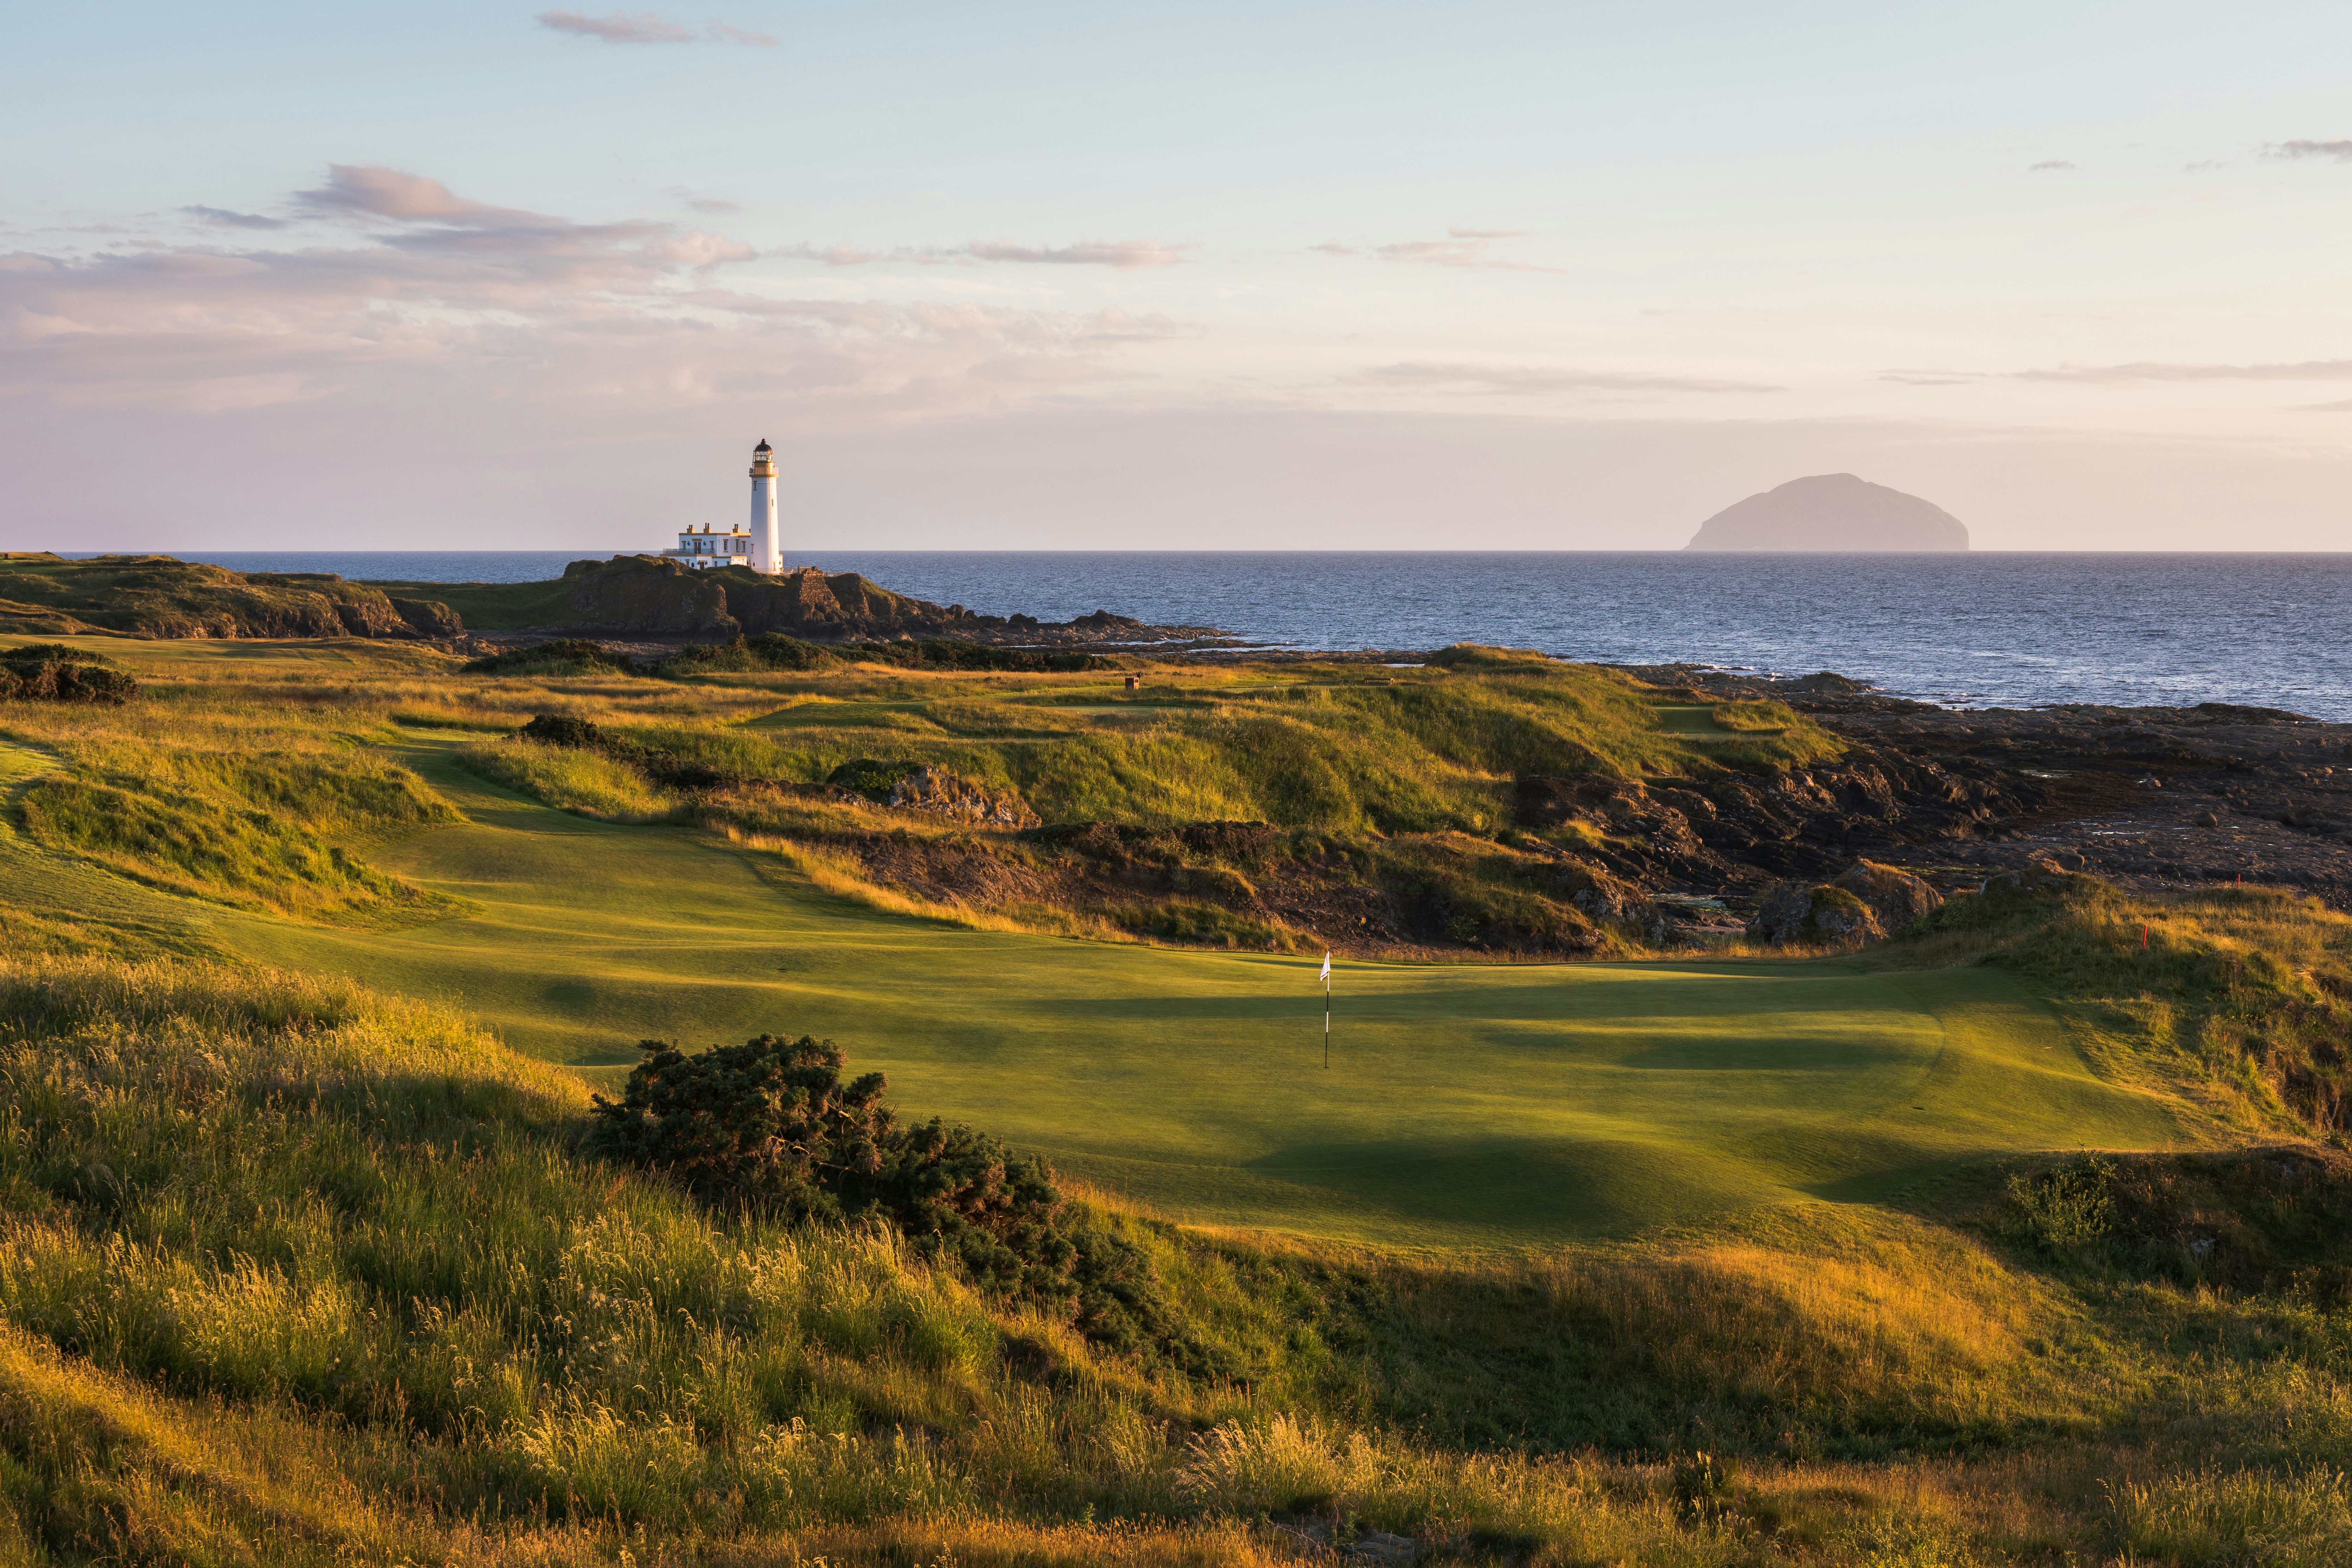 The Turnberry golf course lighthouse pictured in the distance behind rolling green hills